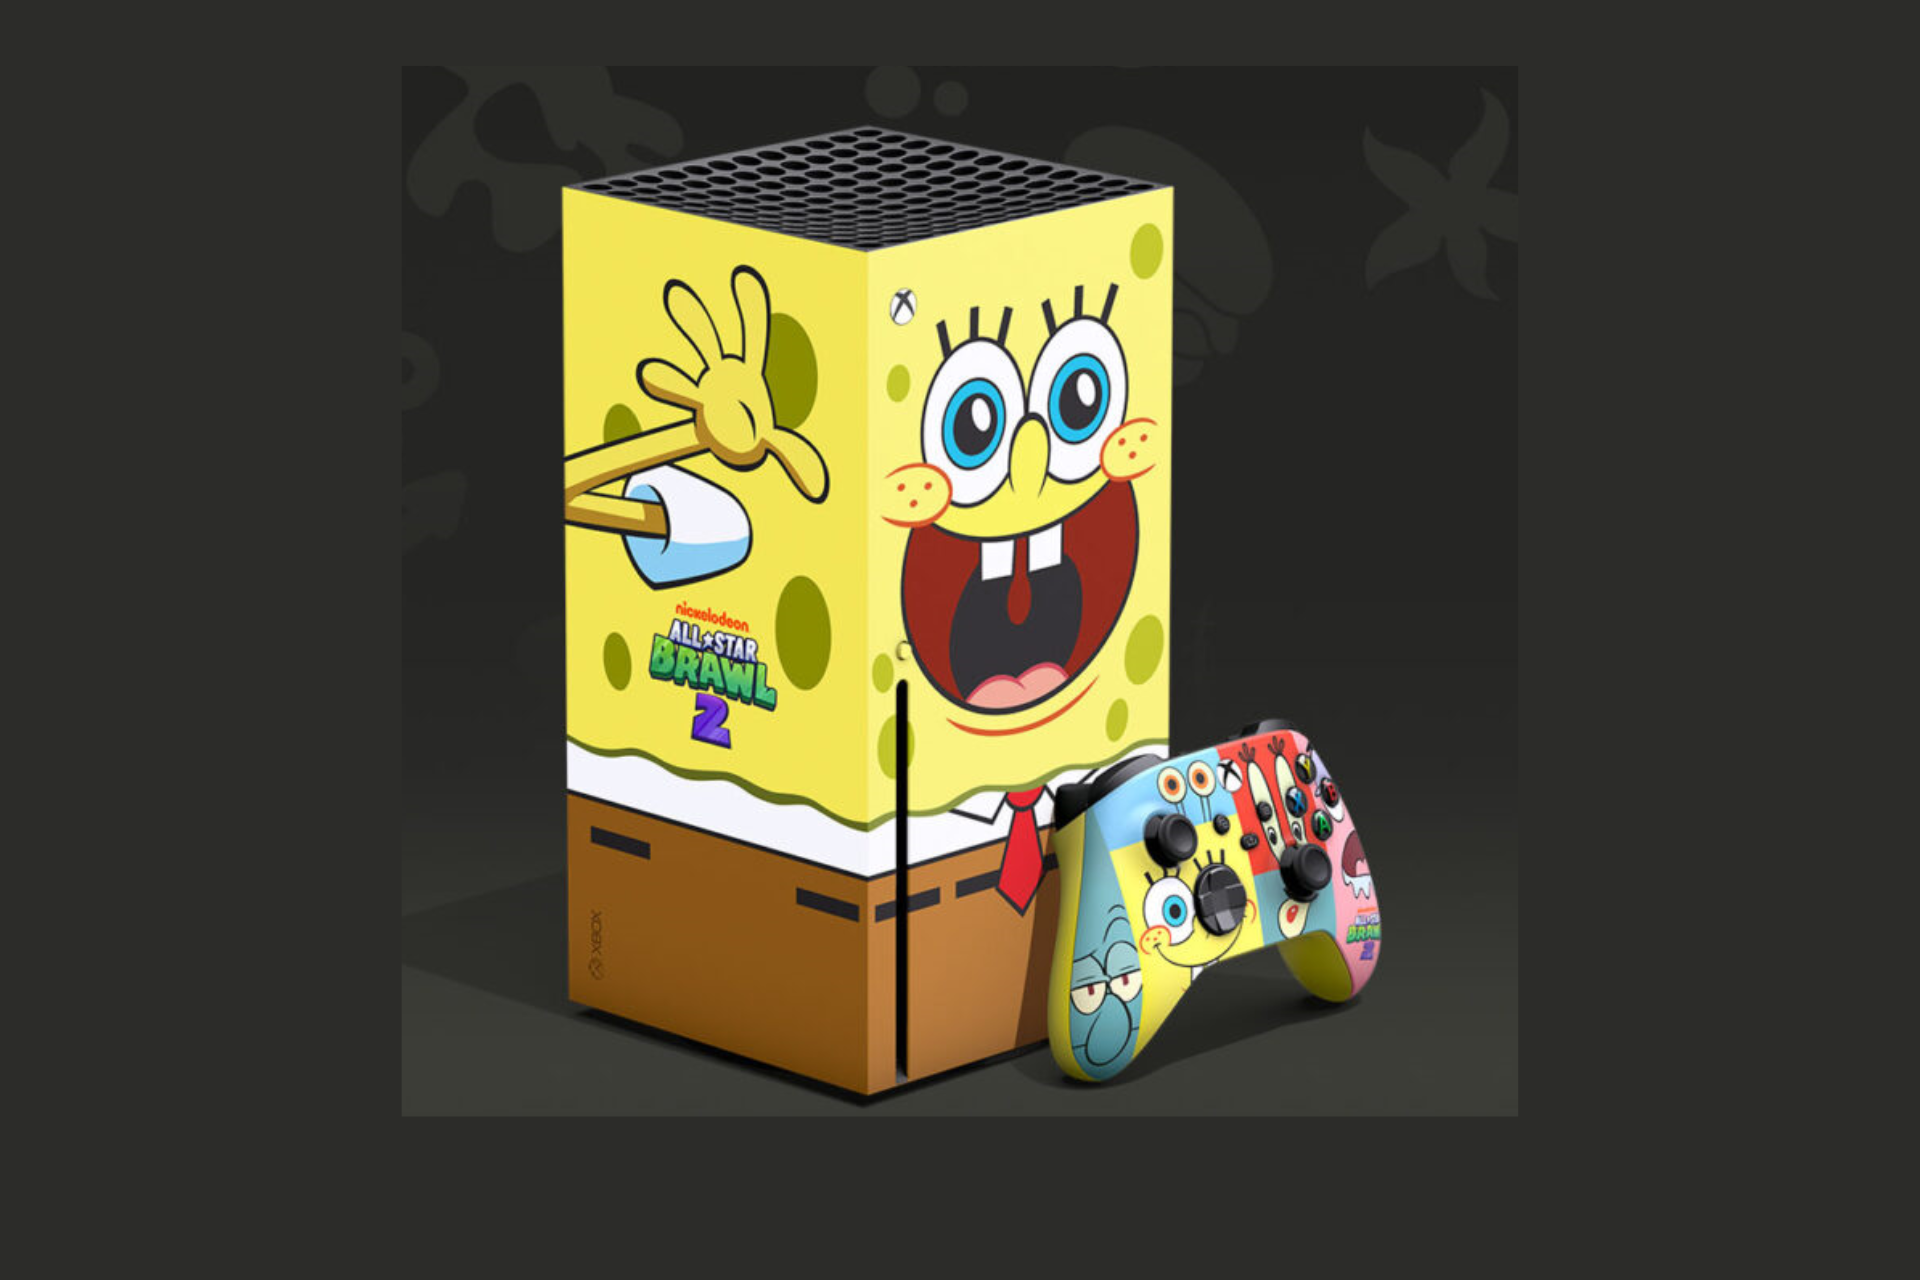 Are you a SpongeBob SquarePants fan, then you might like the new Xbox